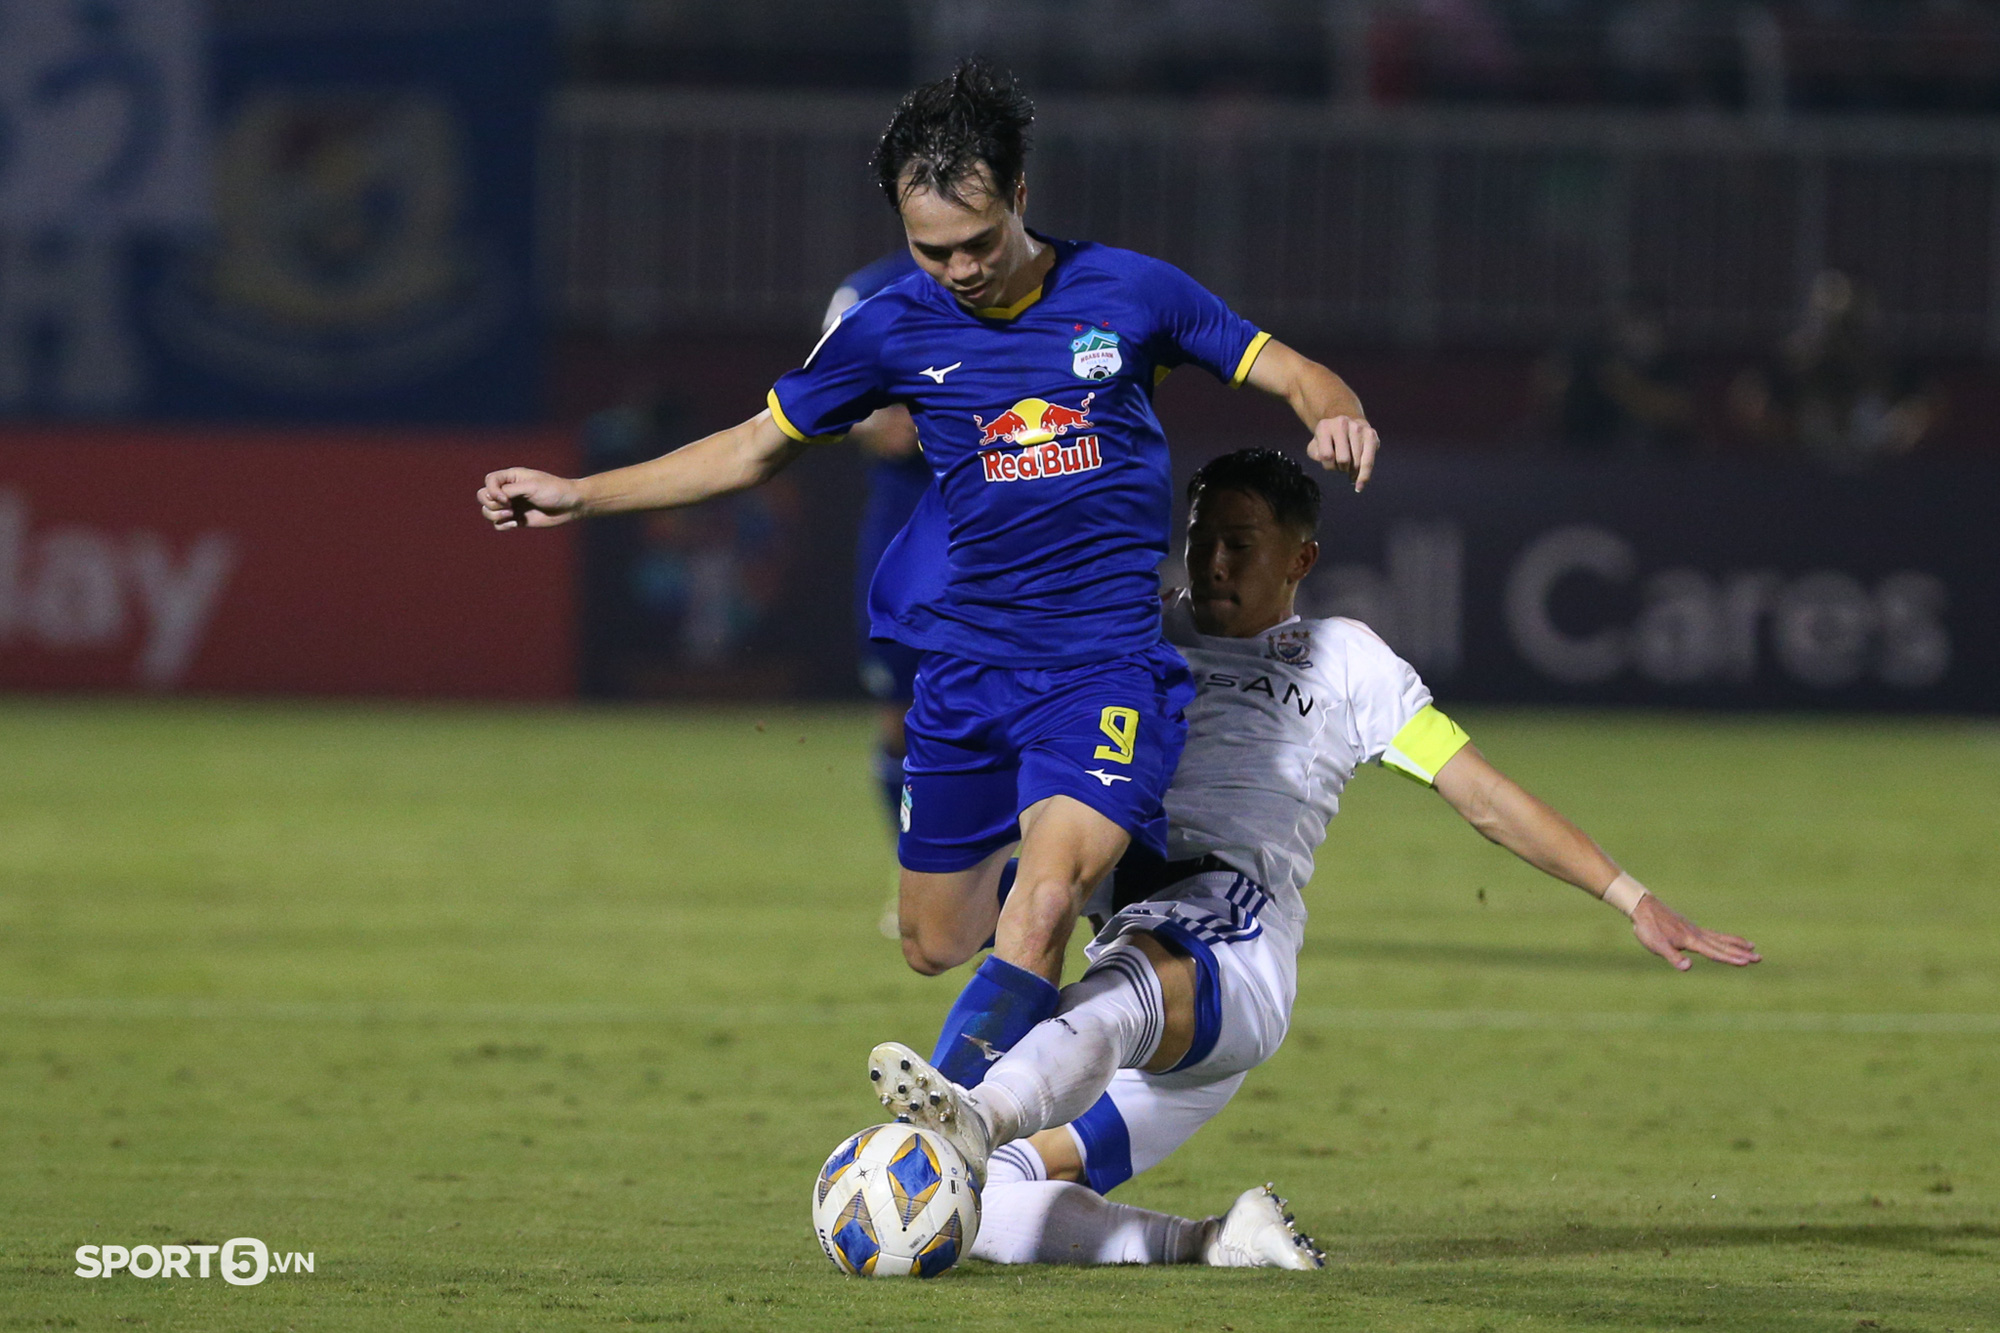 Xuan Truong played fair-play even though the home team was leading in the AFC Champions League - Photo 5.